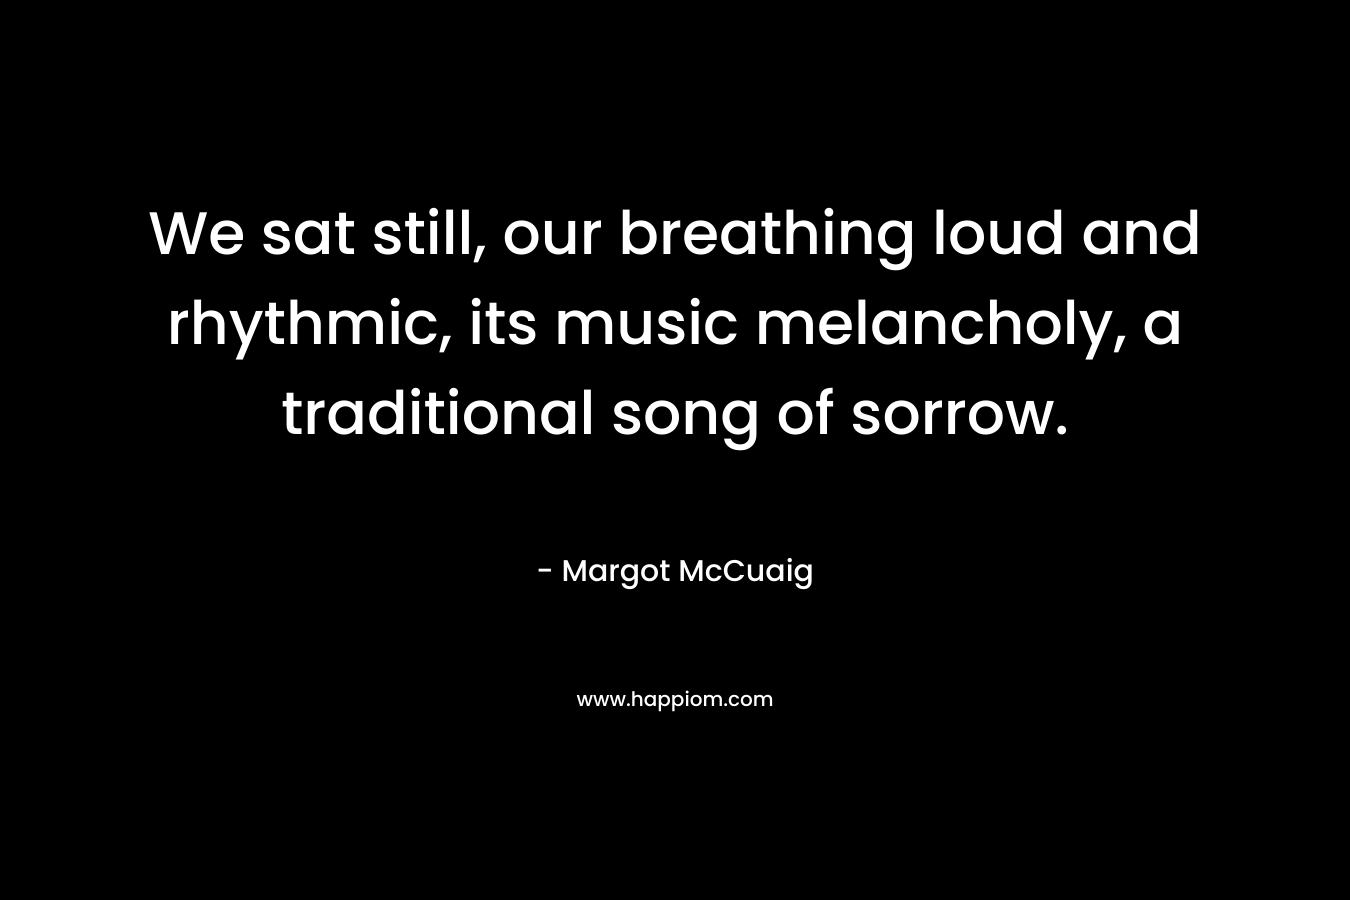 We sat still, our breathing loud and rhythmic, its music melancholy, a traditional song of sorrow.